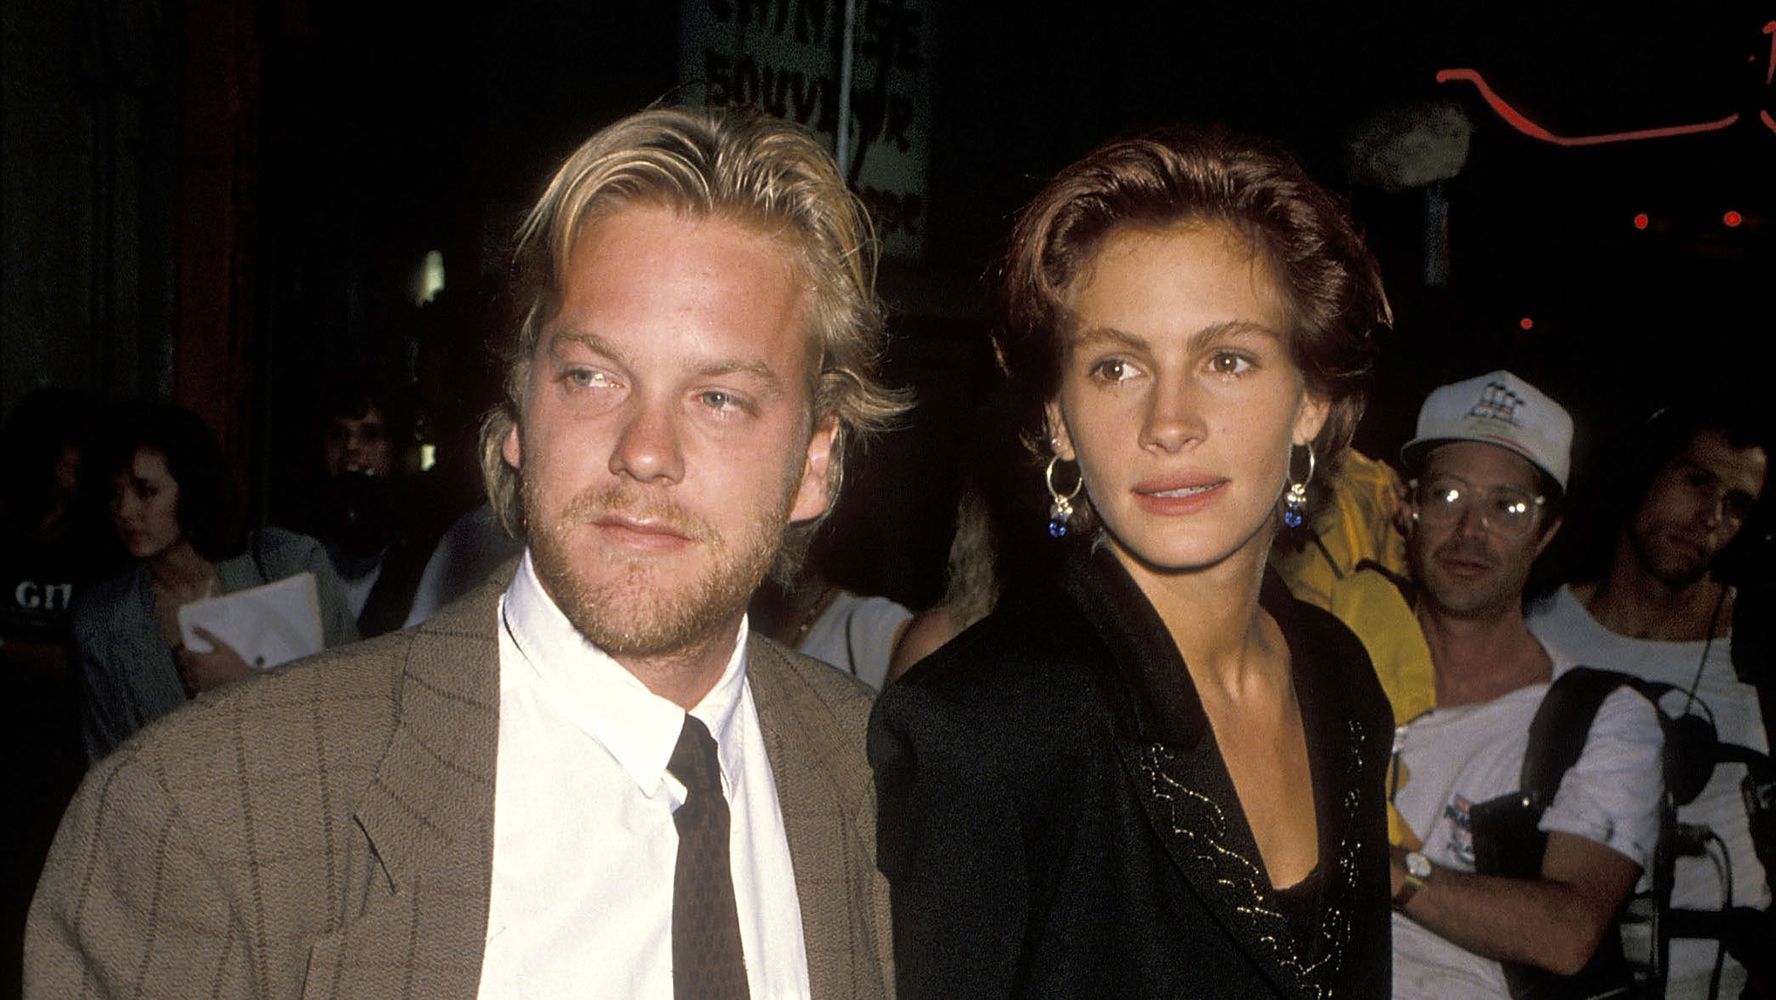 Julia Roberts became a runaway bride back in 1991 when she was about to wed actor Keifer Sutherland